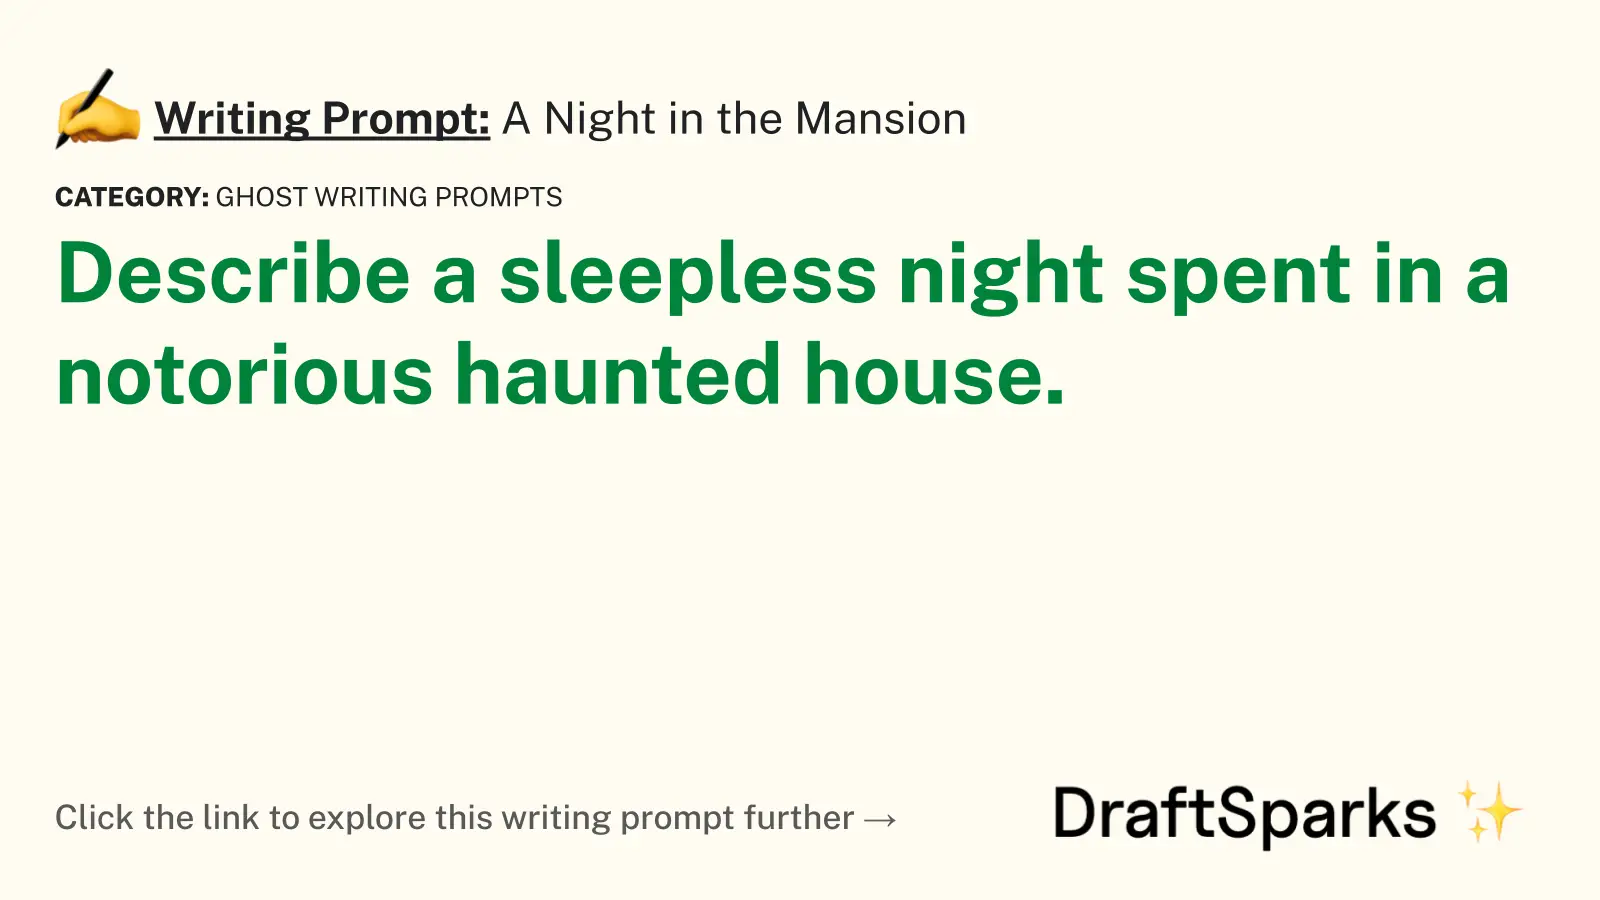 A Night in the Mansion